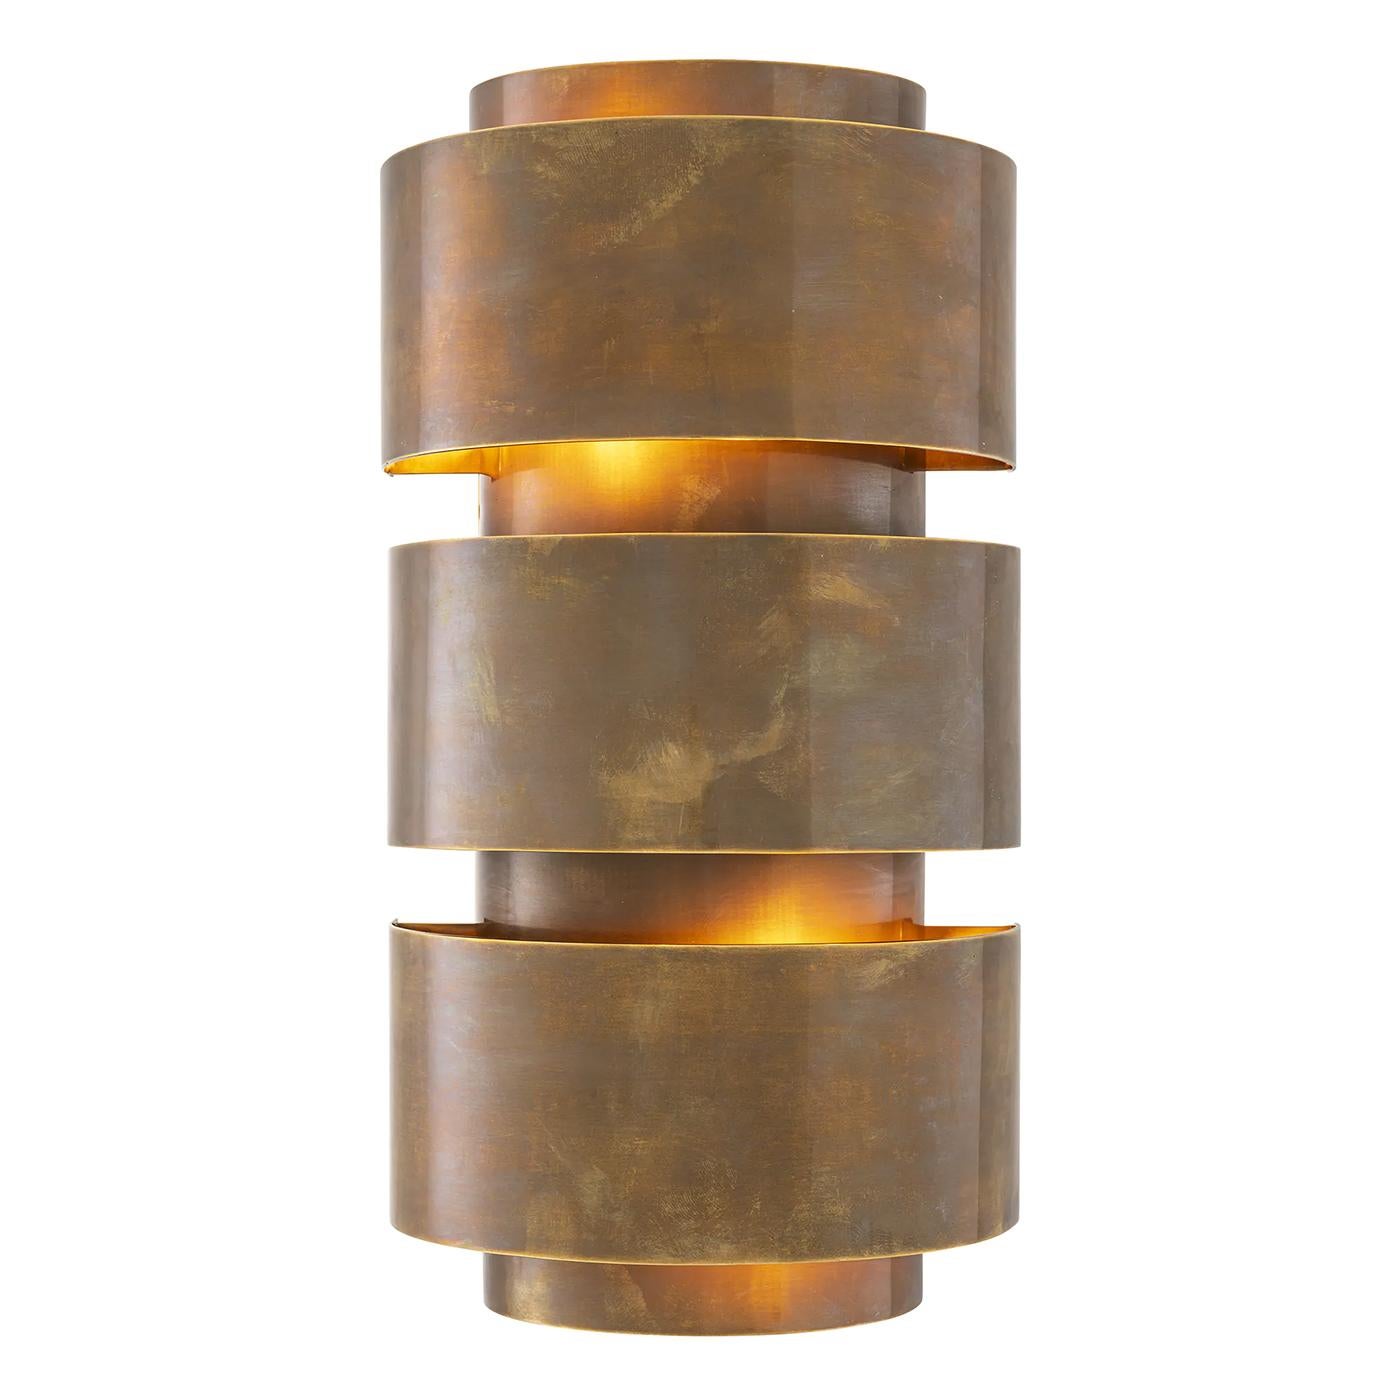 Wall lamp Ellias medium with all structure in solid brass,
2 bulbs, lamp holder type E14, max 25 watt, bulbs
not included.